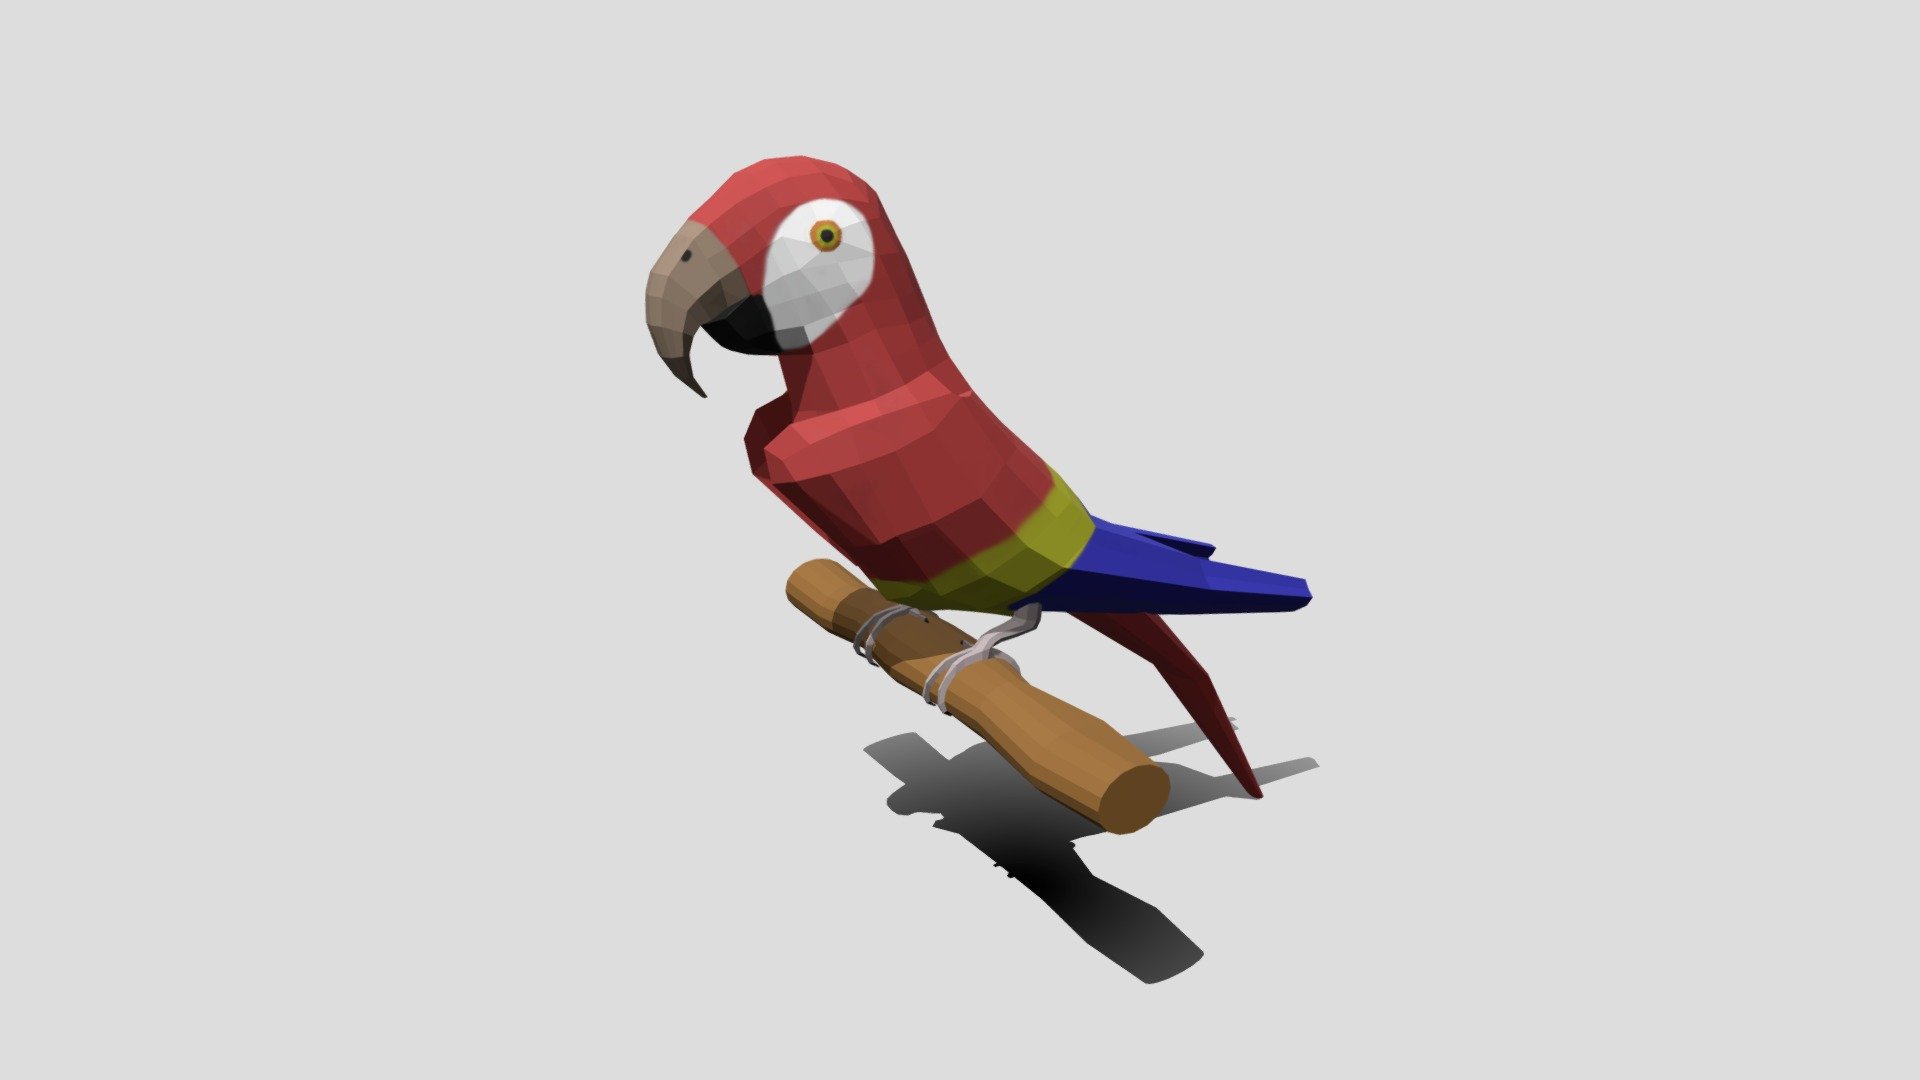 This is a low poly 3d model of a macaw parrot. The low poly parrot was modeled and prepared for low-poly style renderings, background, general CG visualization presented as a mesh with quads only.

Verts : 1.114 Faces: 1.110

Hand painted diffuse texture is included, UV unwrap and mapping is available

The original file was created in blender. You will receive a 3DS, OBJ, FBX, blend, DAE, STL.

Warning: Depending on which software package you are using, the exchange formats (.obj, .3ds, .dae .fbx) may not match the preview images exactly. Due to the nature of these formats, there may be some textures that have to be loaded by hand and possibly triangulated geometry.

All preview images were rendered with Blender Cycles. Product is ready to render out-of-the-box. Please note that the lights, cameras, and background is only included in the .blend file. The model is clean and alone in the other provided files, centered at origin and has real-world scale 3d model